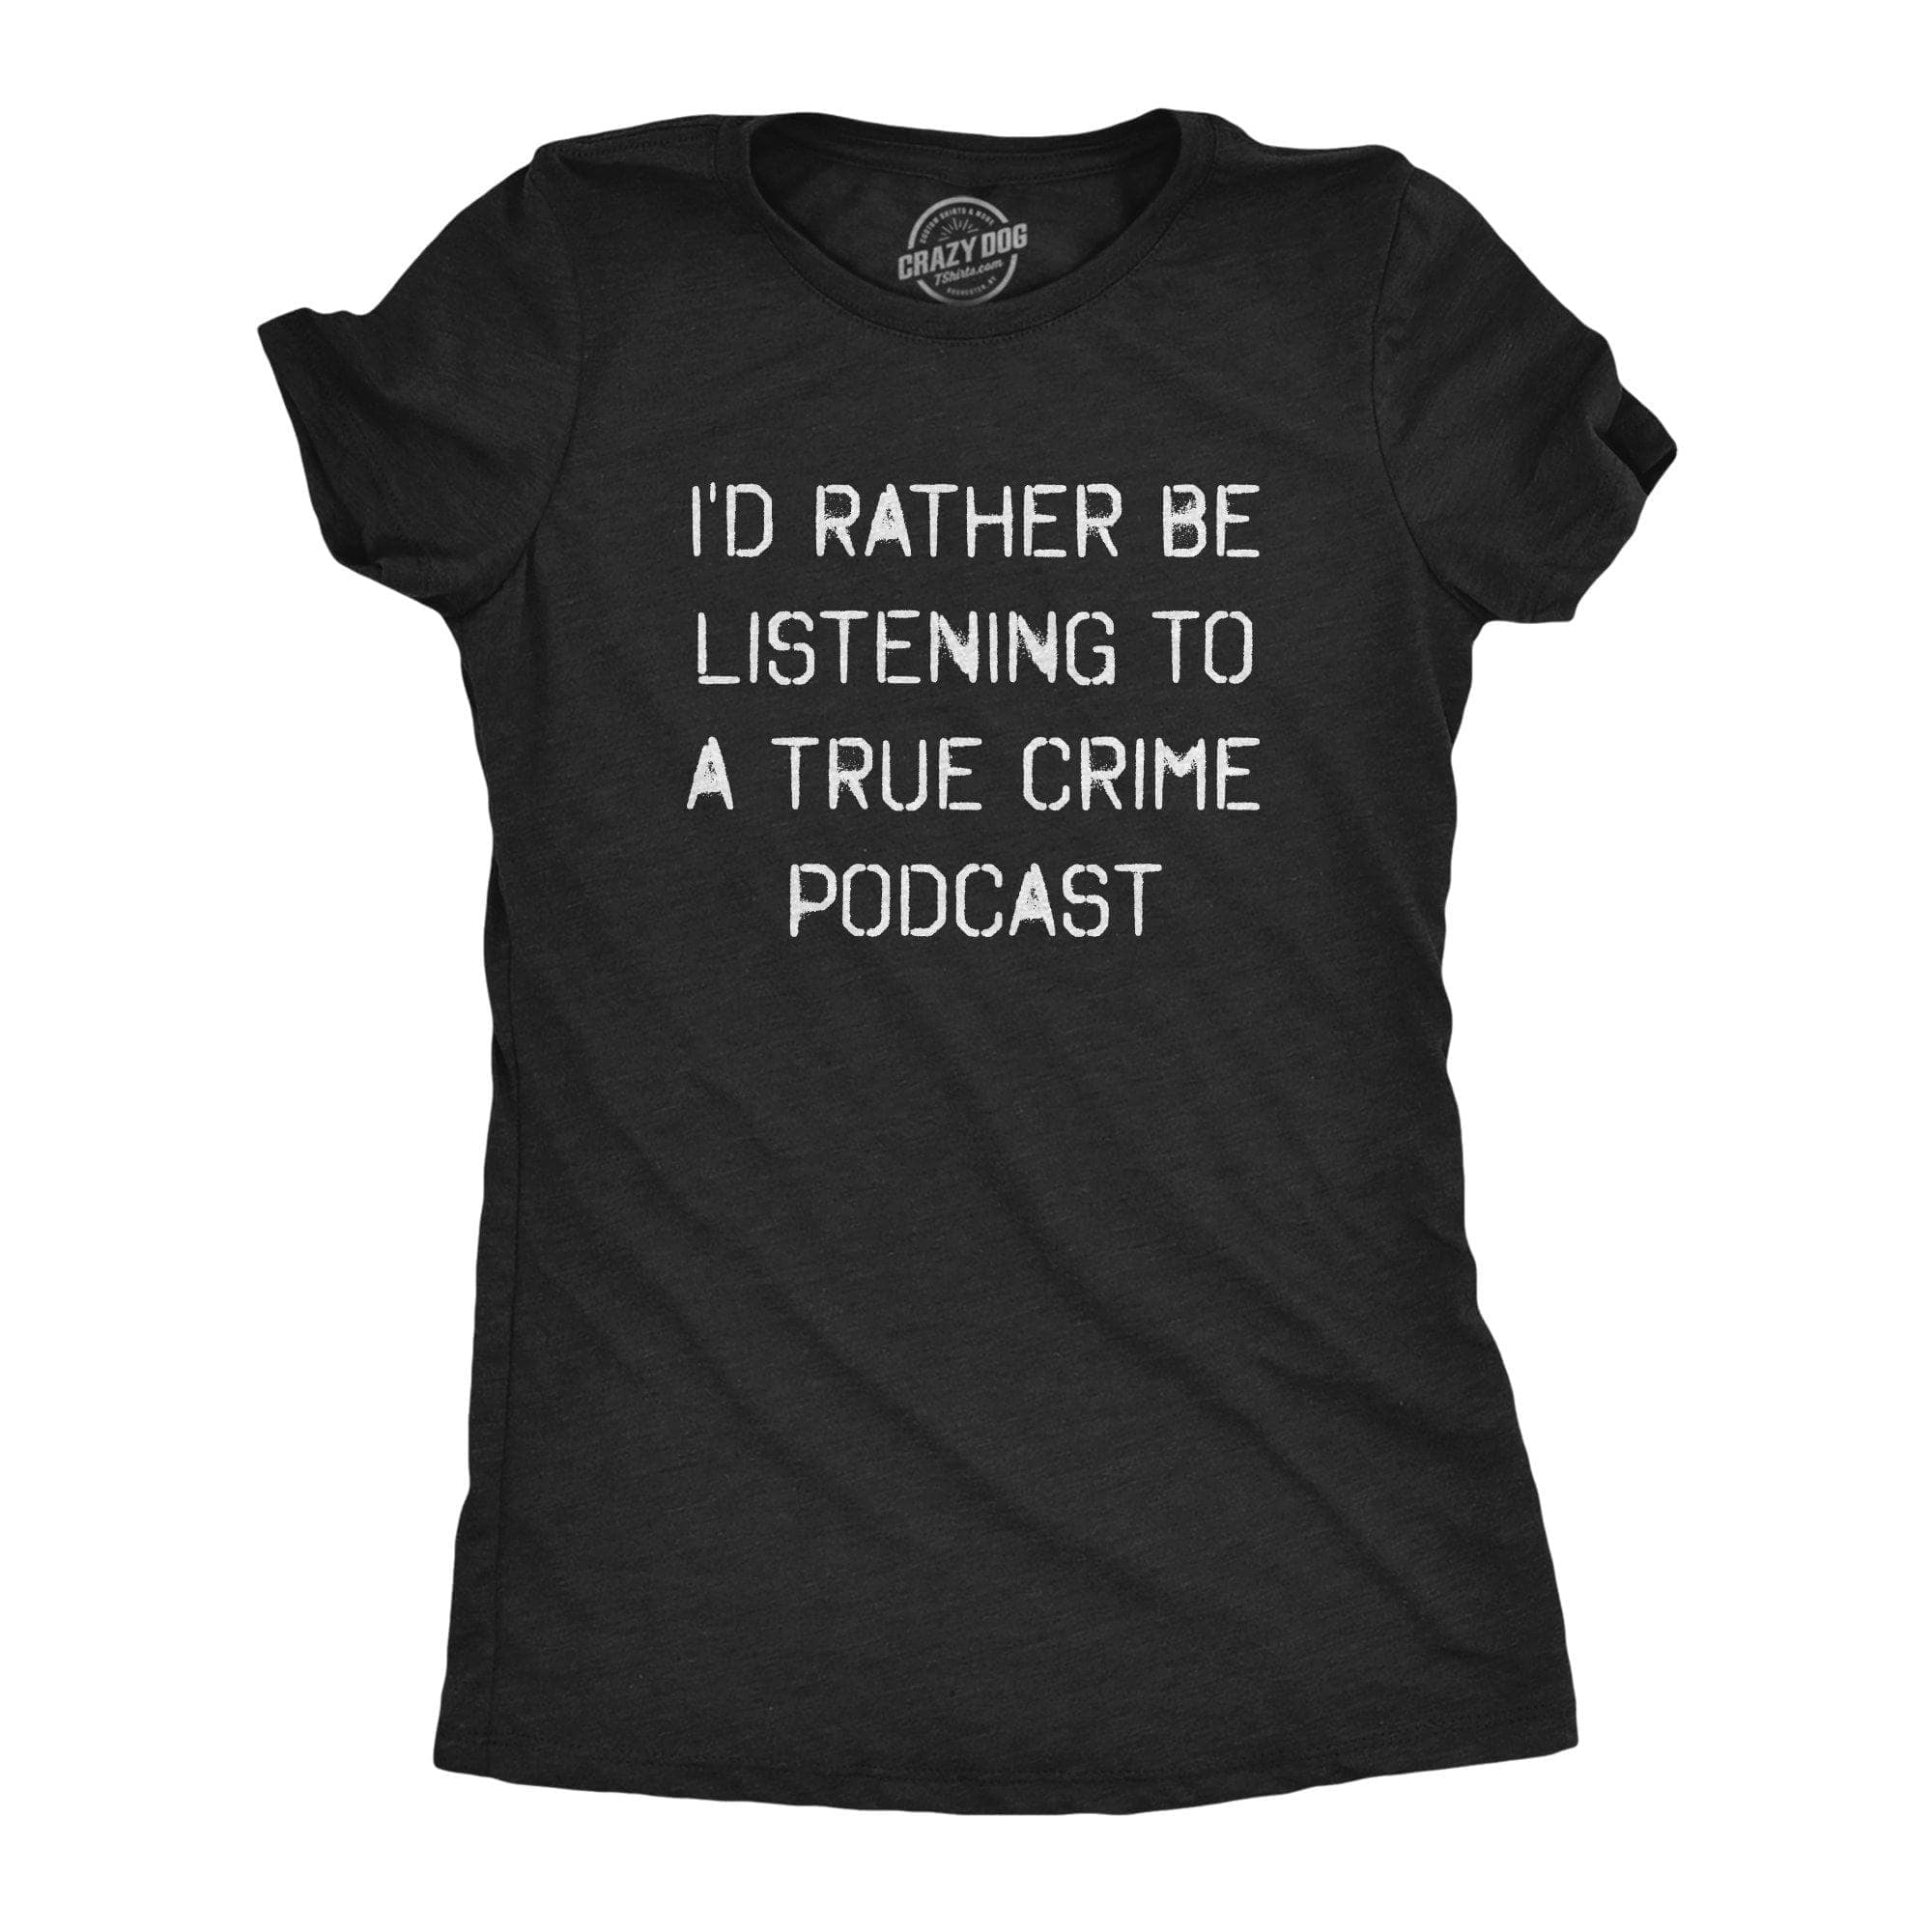 I'd Rather Be Listening To A True Crime Podcast Women's Tshirt - Crazy Dog T-Shirts